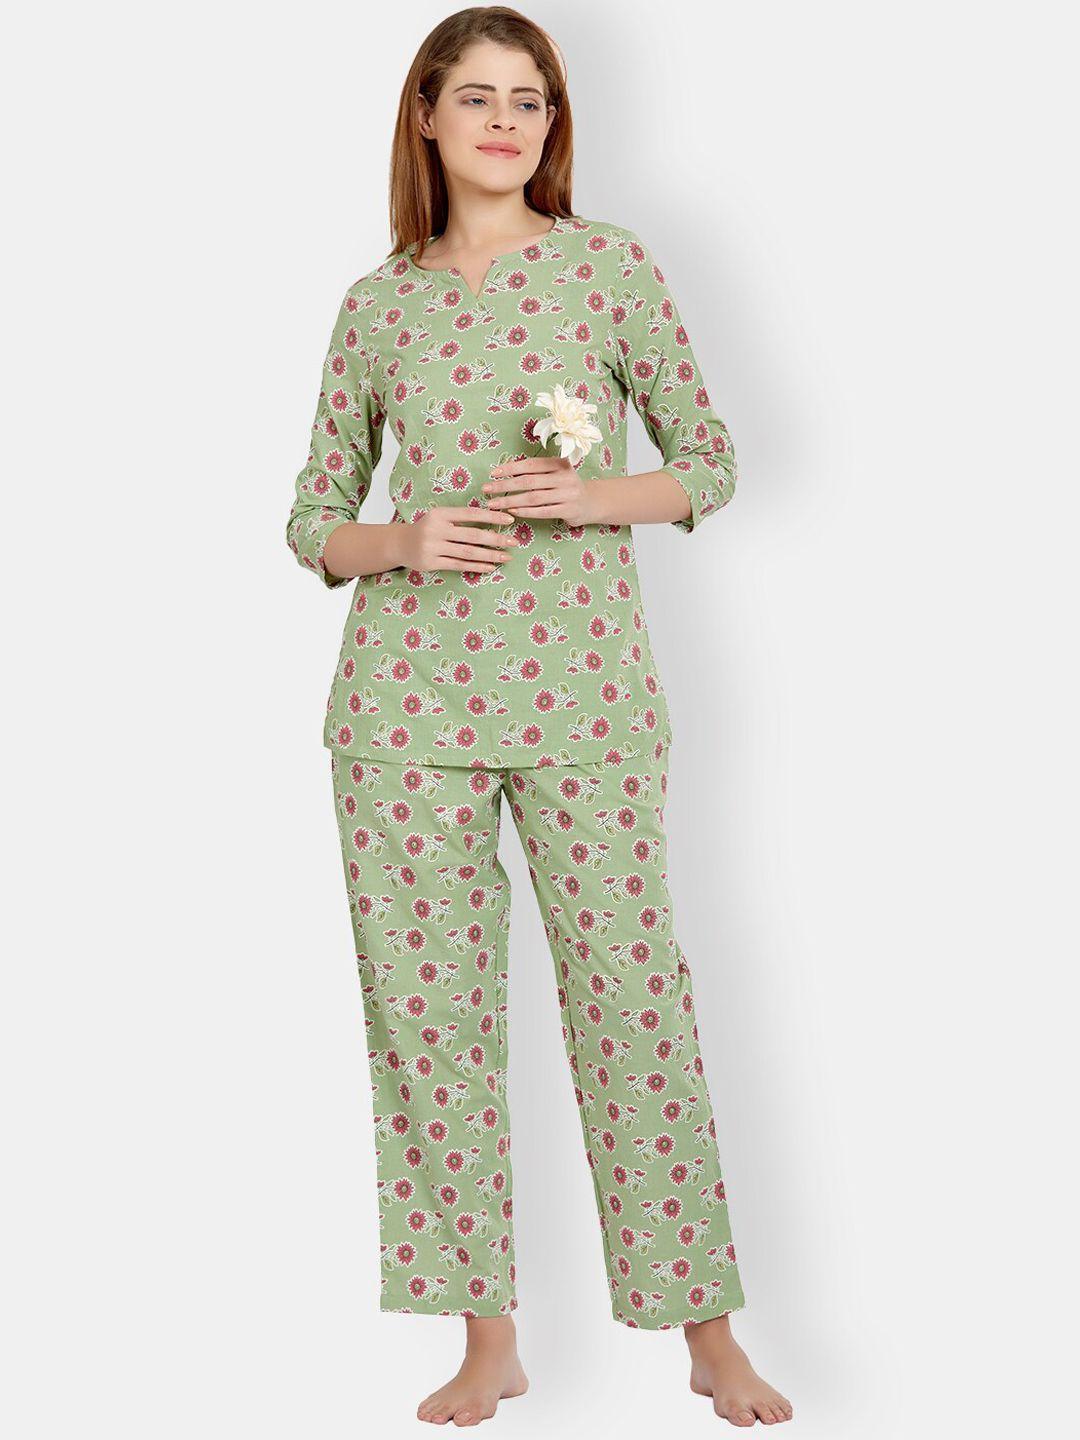 maysixty floral printed night suit